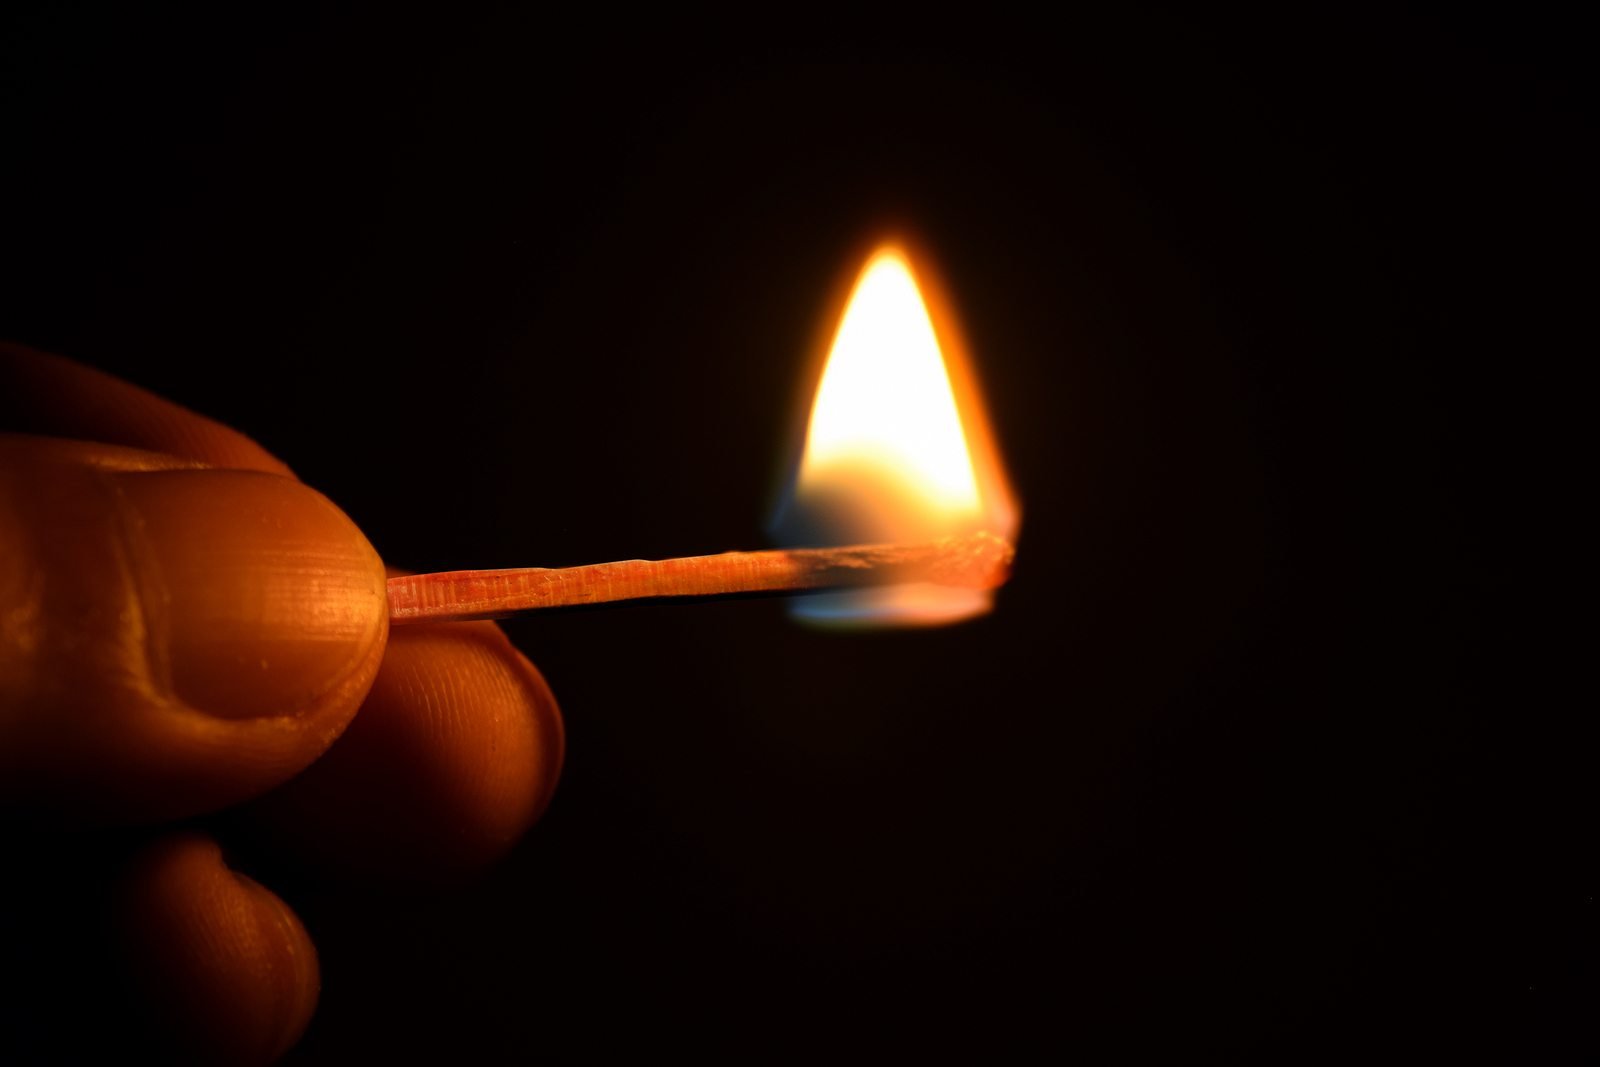 hold are ignited matches isolate on black background